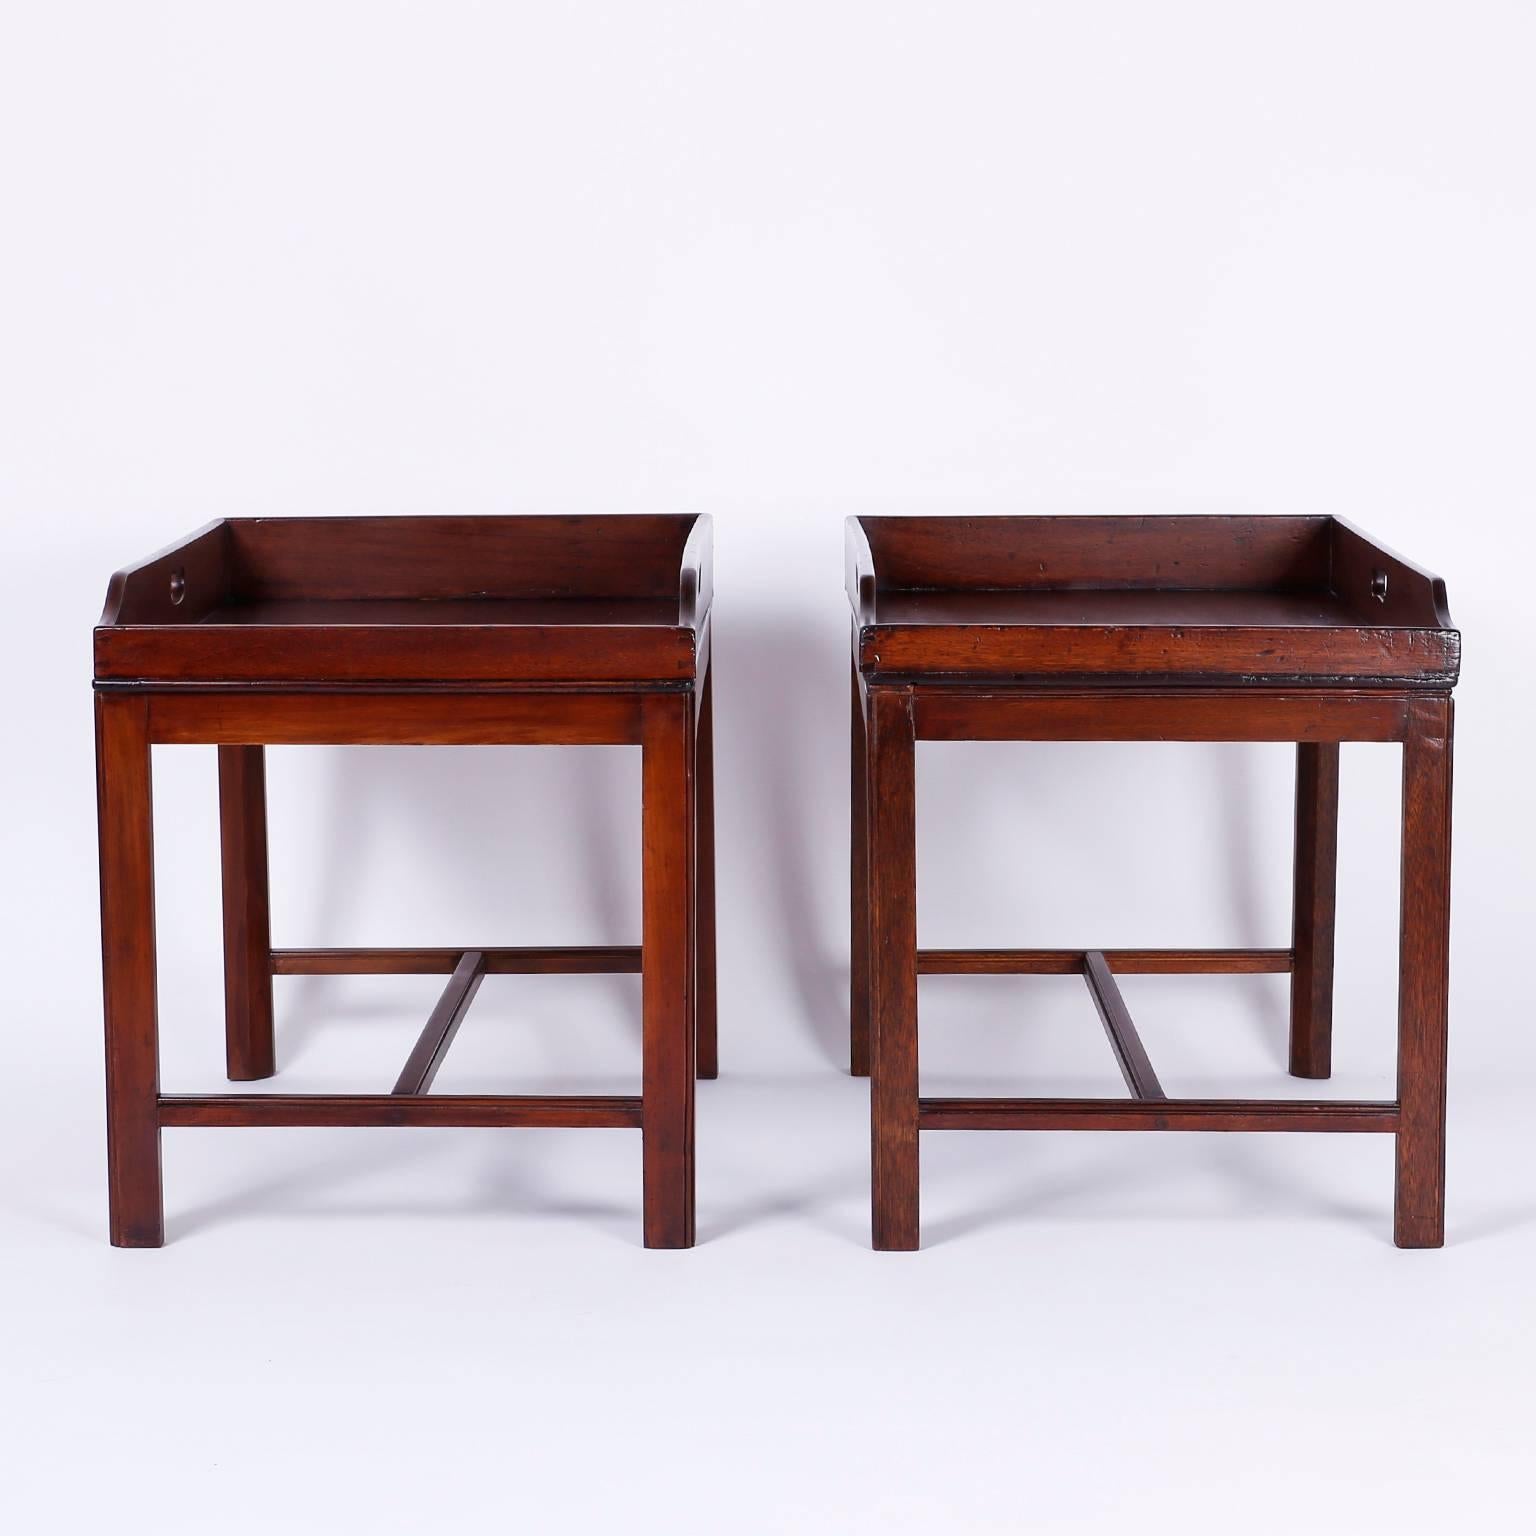 Handsome pair of stylized butlers tray tables that can function as end tables, nightstands or for serving. The attached tops have galleries with cut-out handles and sloped fronts. The bases have an unadorned Georgian form giving these tables a